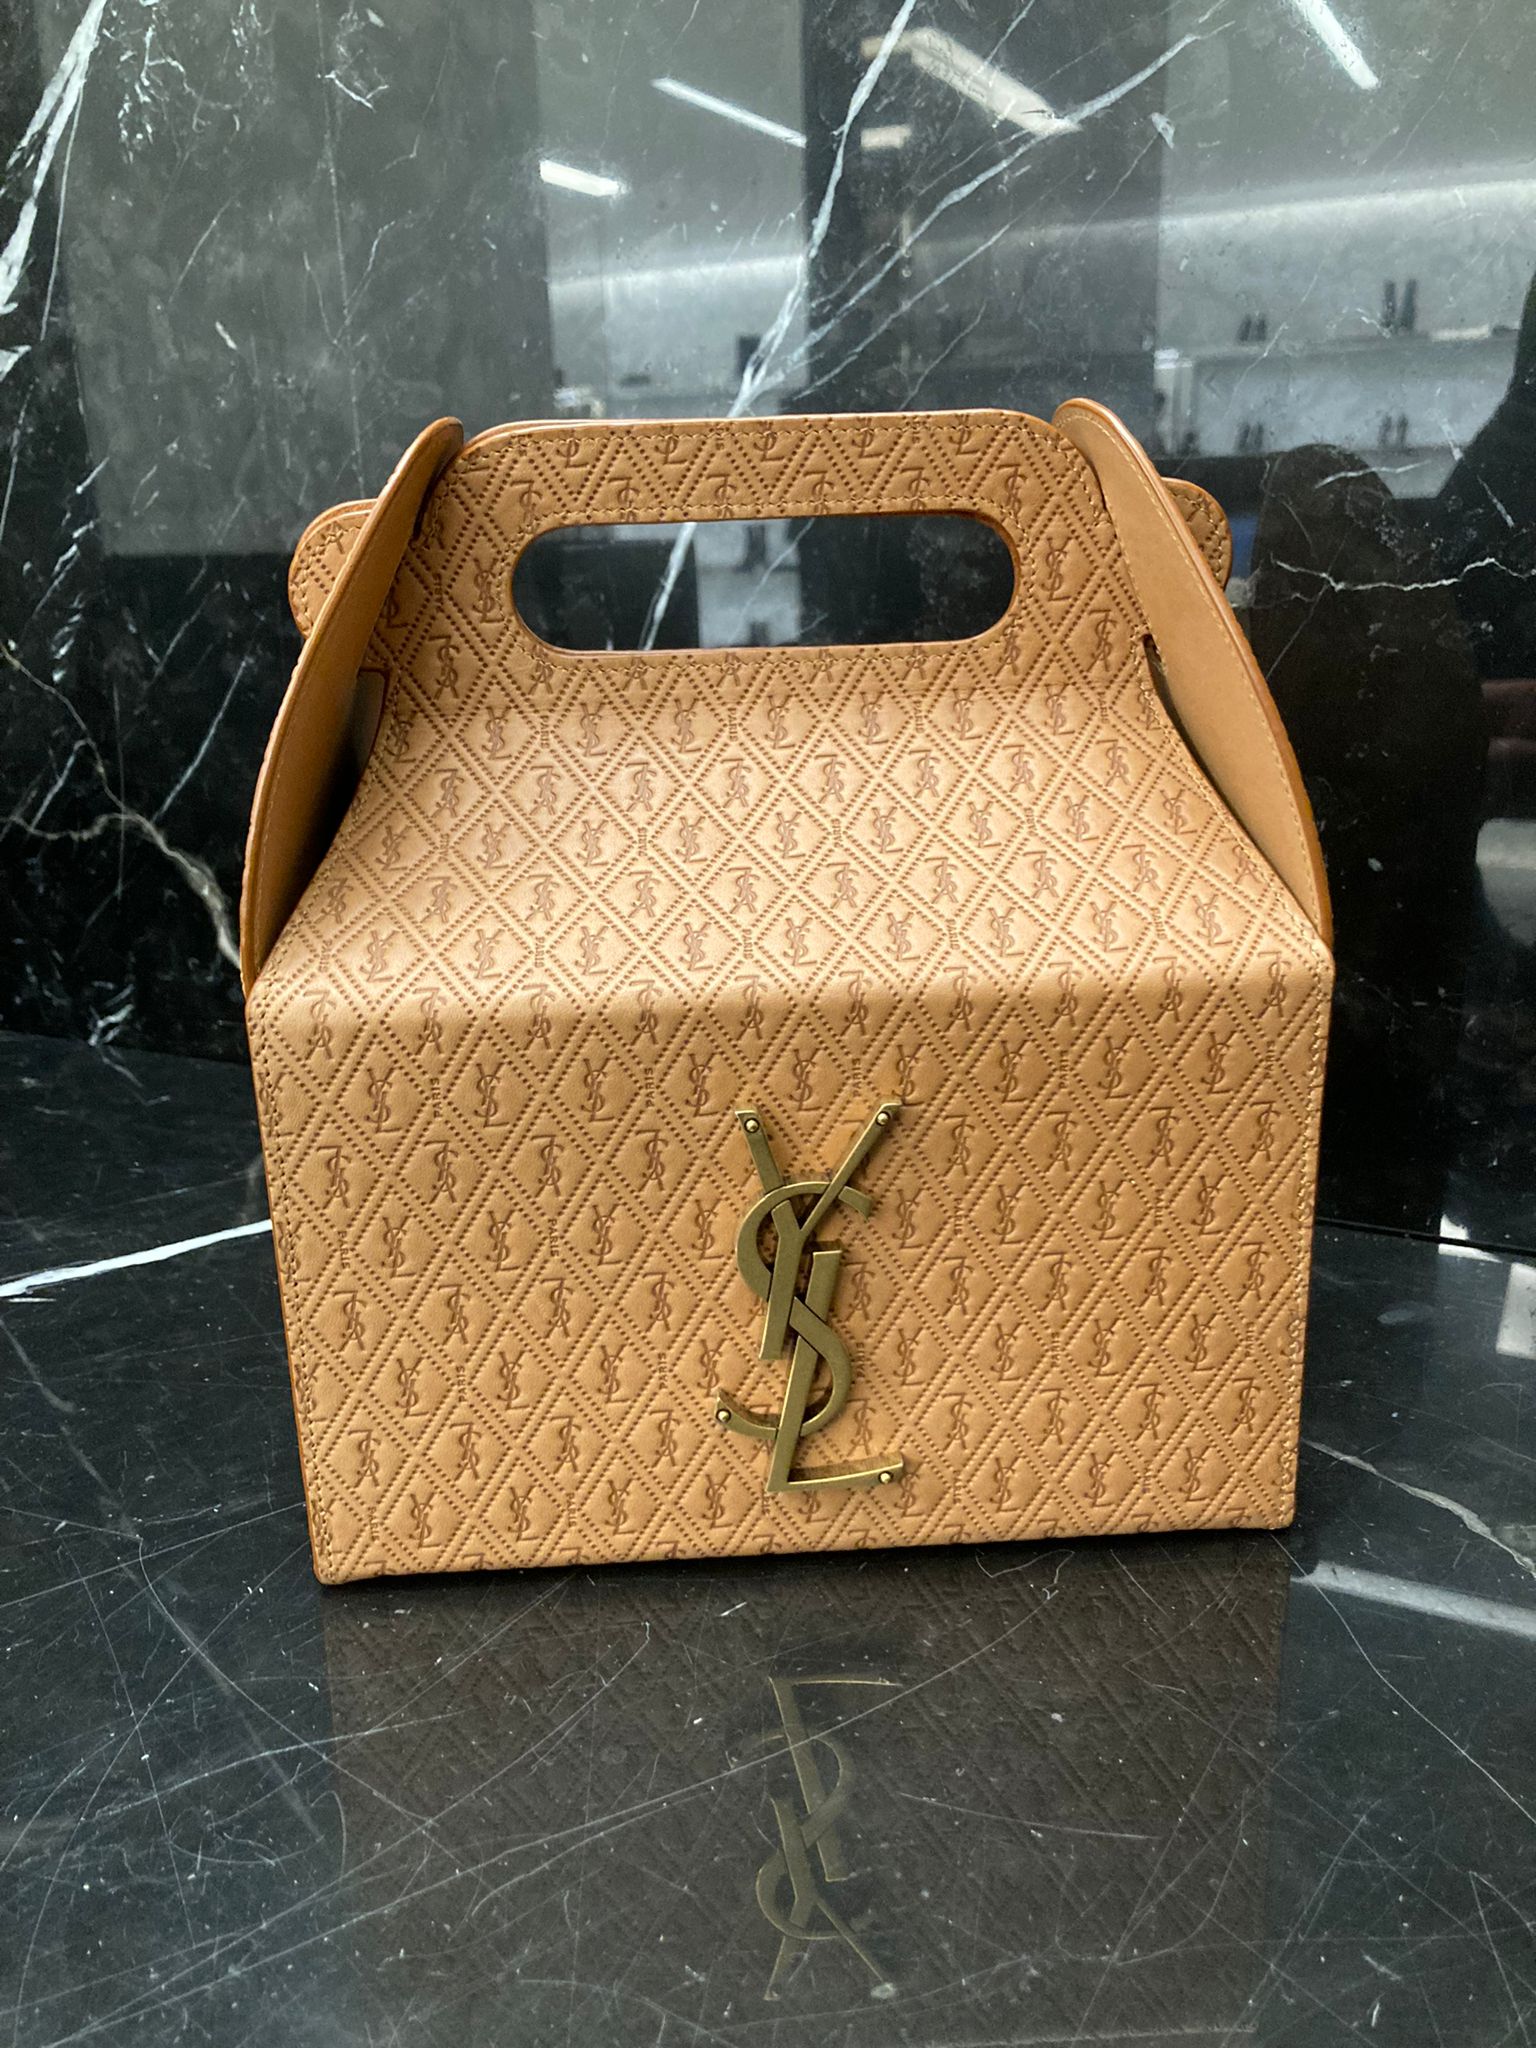 Are YSL Bags Worth it? The New YSL Icare Maxi Bag Might Just Be!